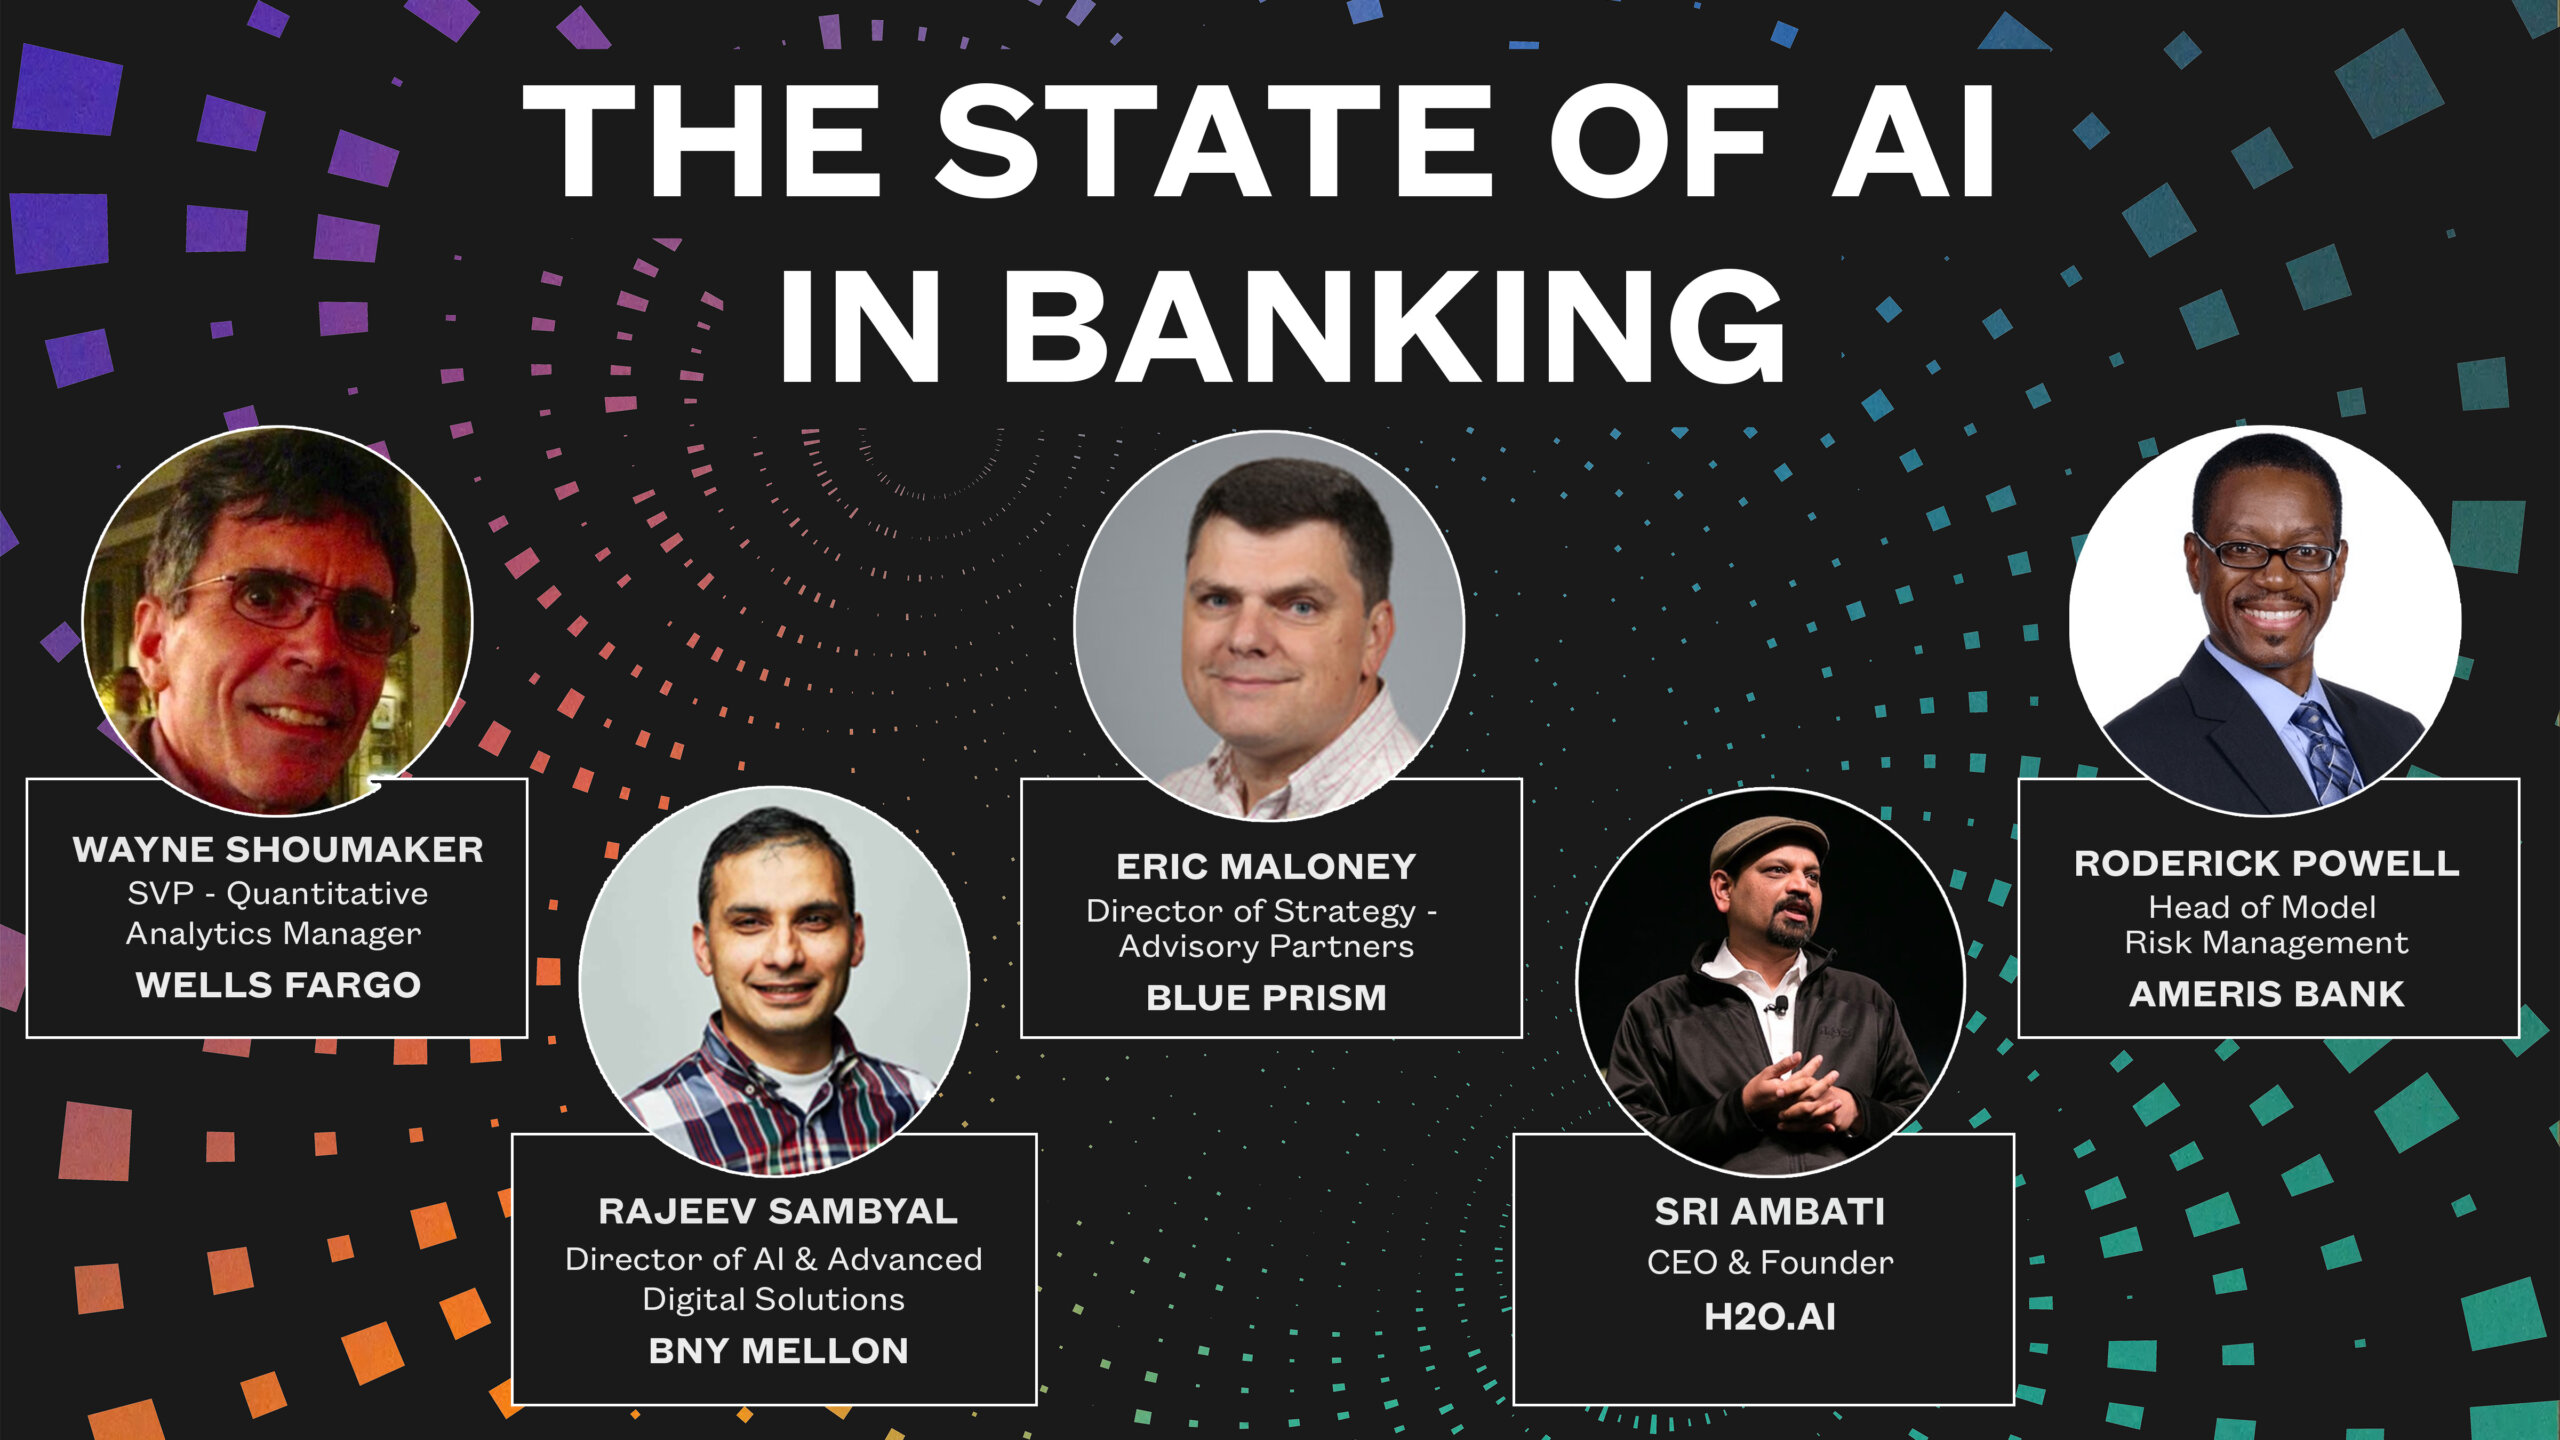 https://ai4.io/dev/blog/2020/04/21/how-covid-19-is-impacting-the-state-of-ai-in-banking/